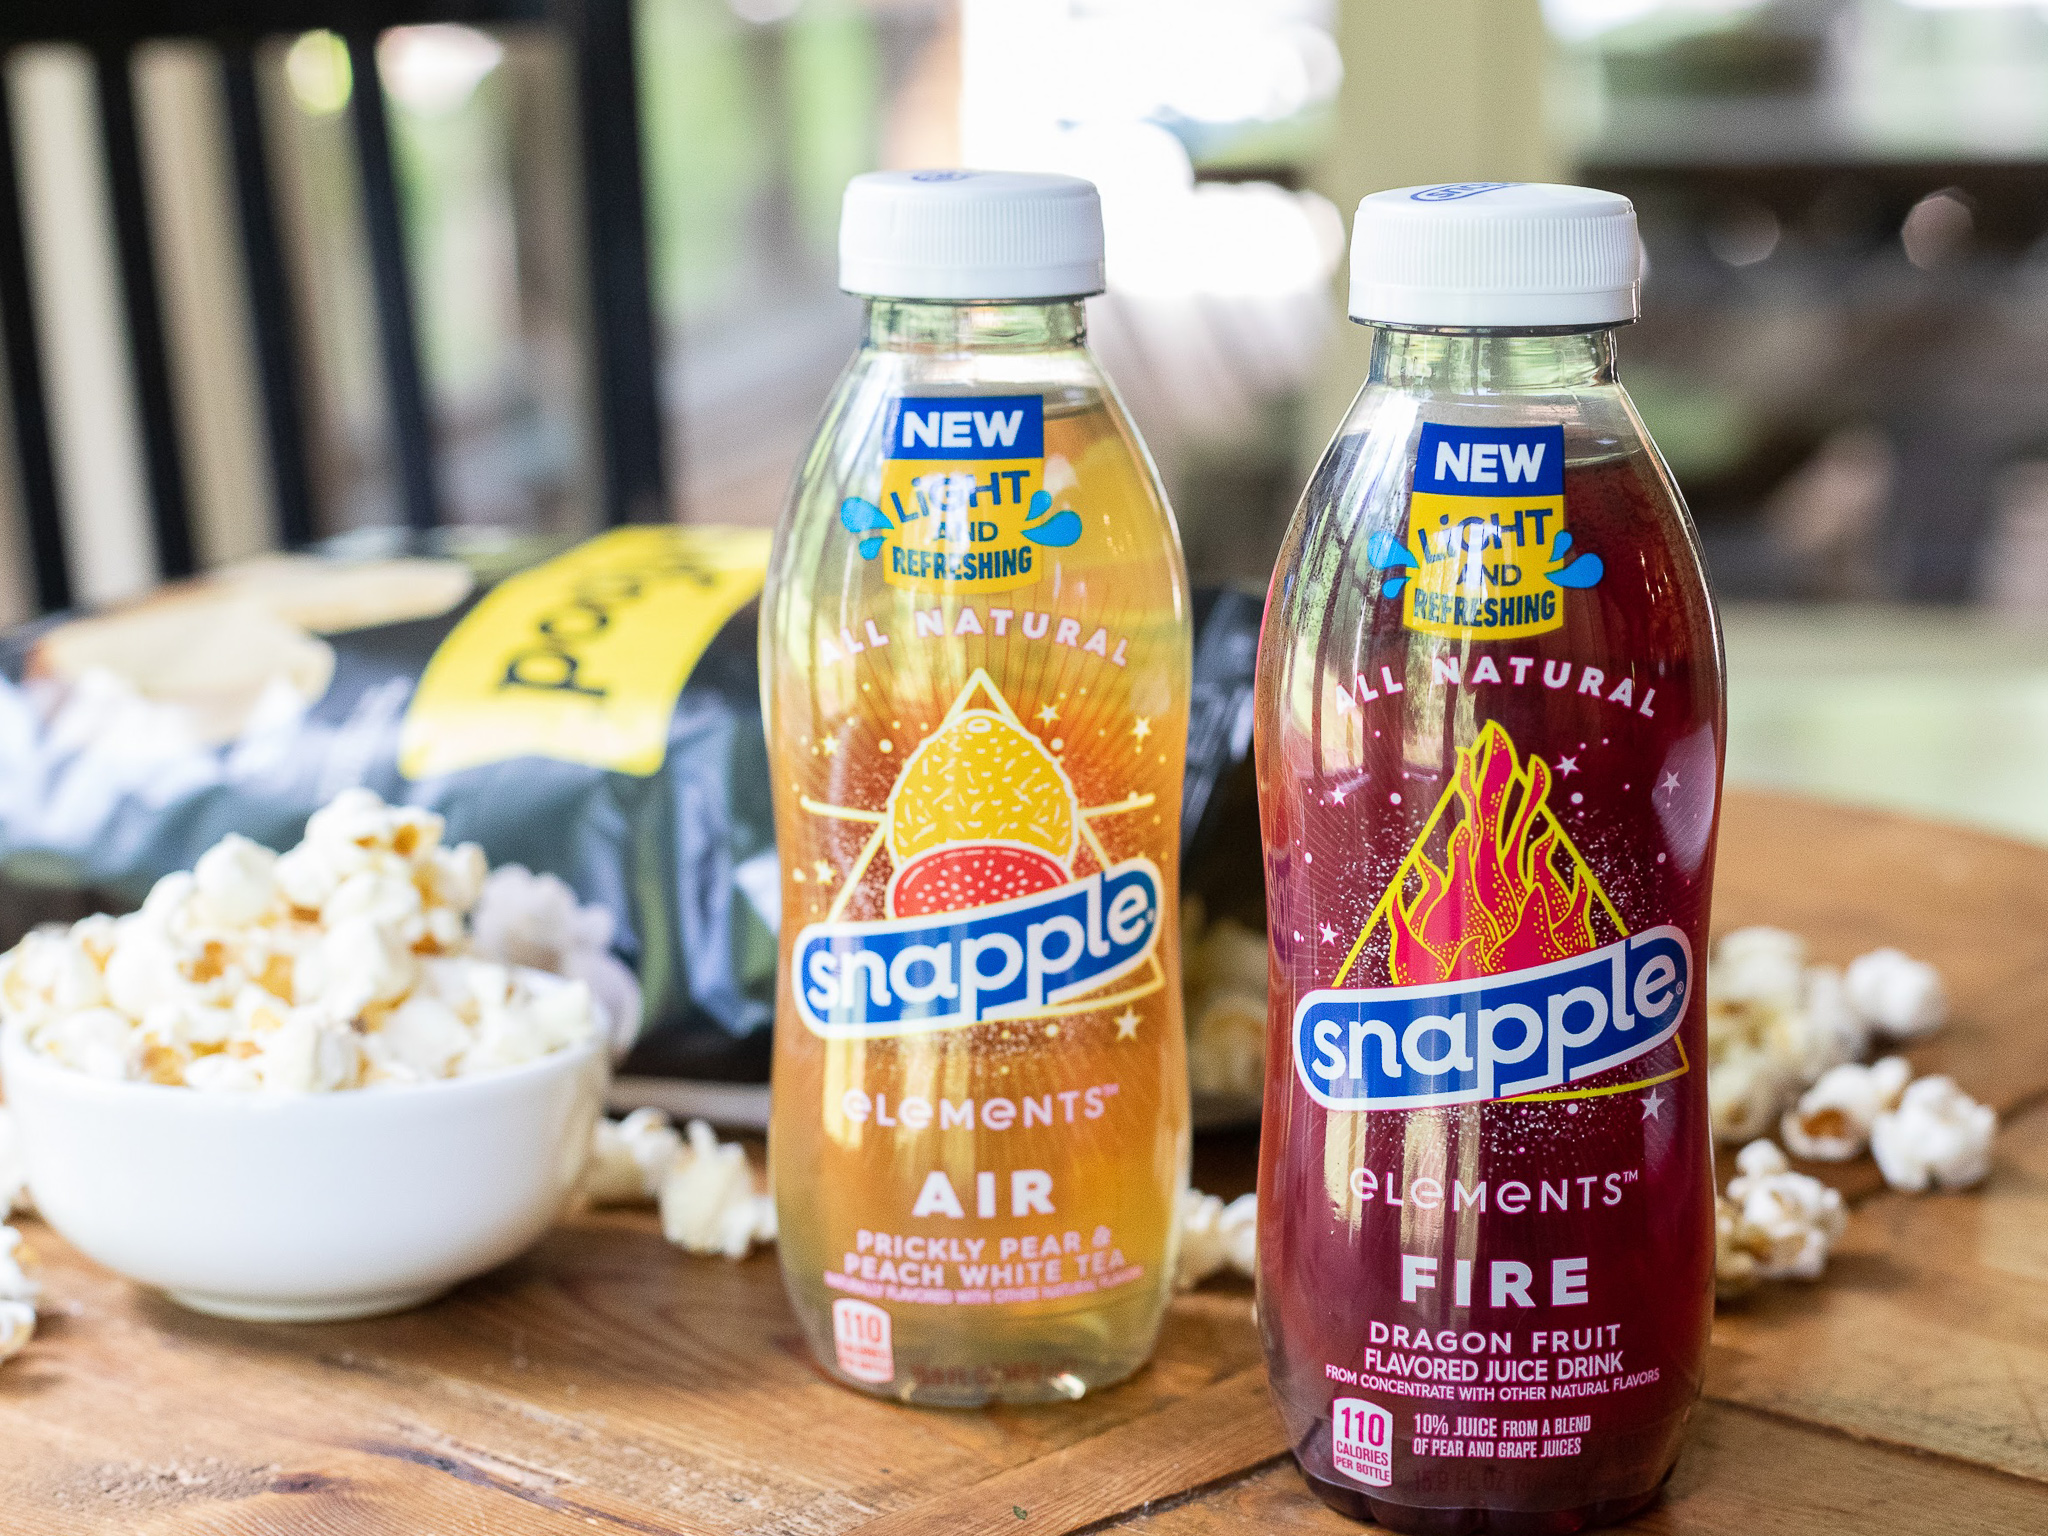 Grab A Discount On Snapple Elements At Publix